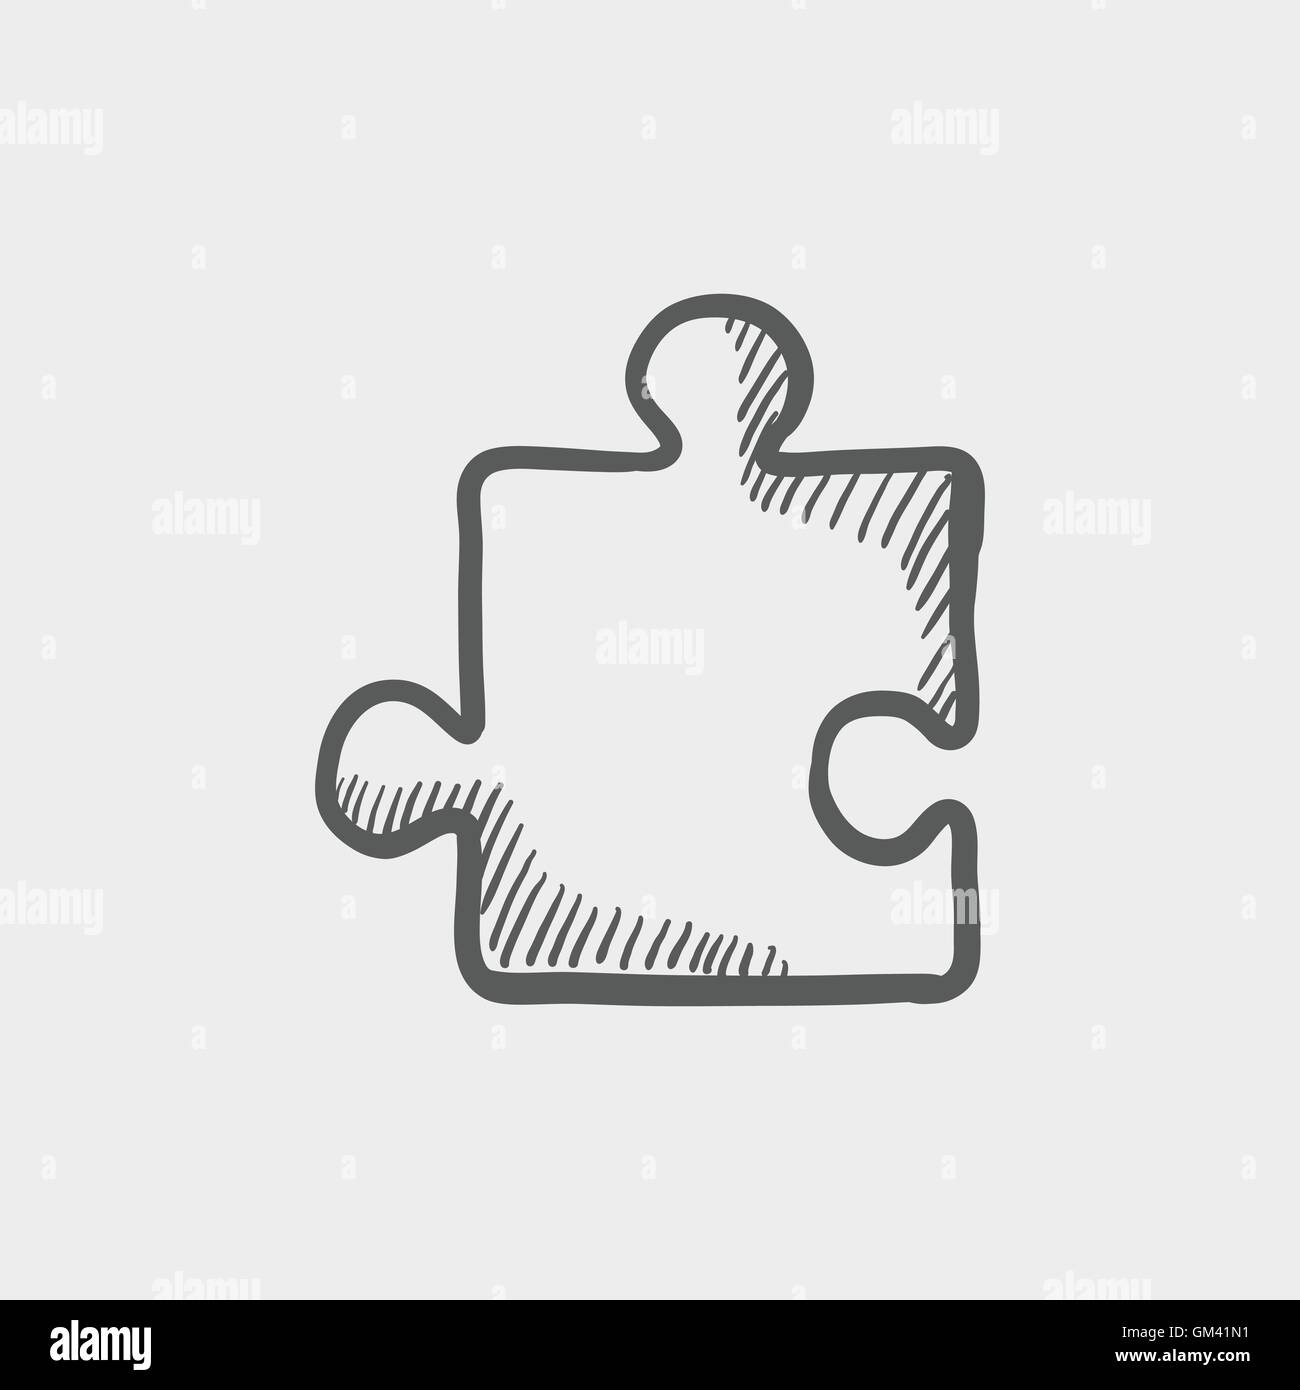 380 Jigsaw Piece Sketch Stock Photos Pictures  RoyaltyFree Images   iStock